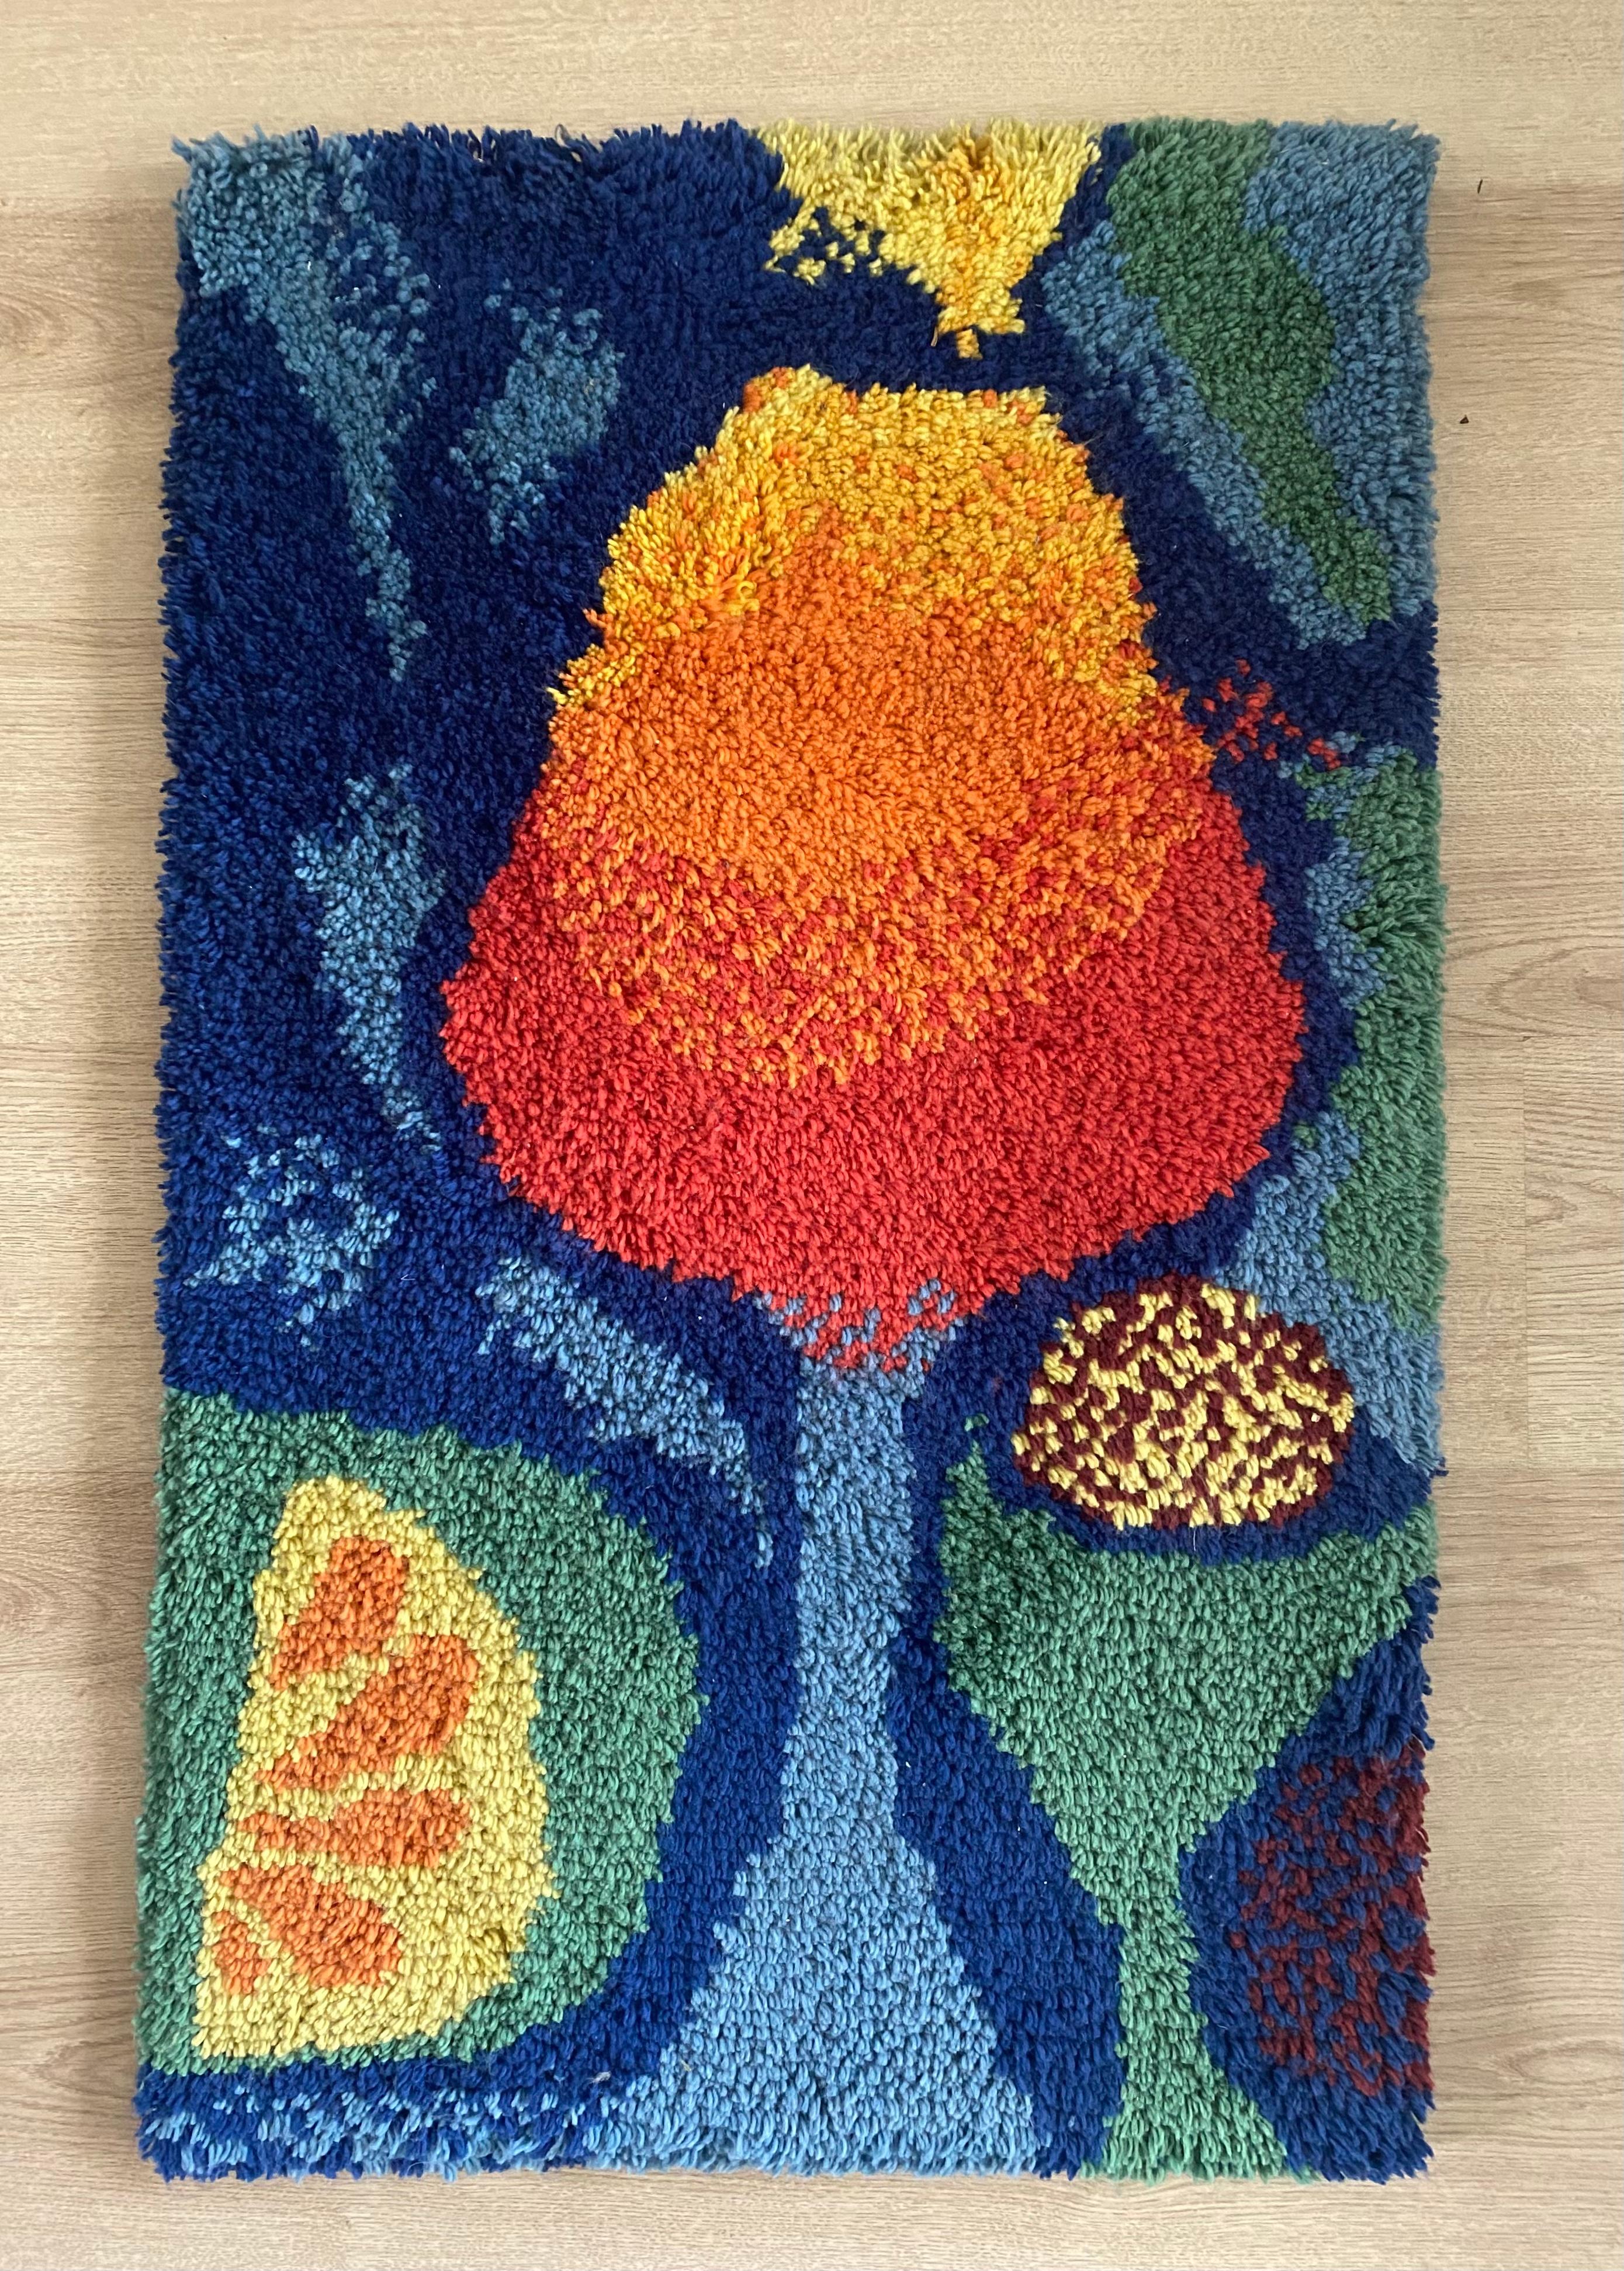 Wonderful vintage tapestry with very vivid colors with abstract floral image.
Artist unknown. Very good condition for it’s age.